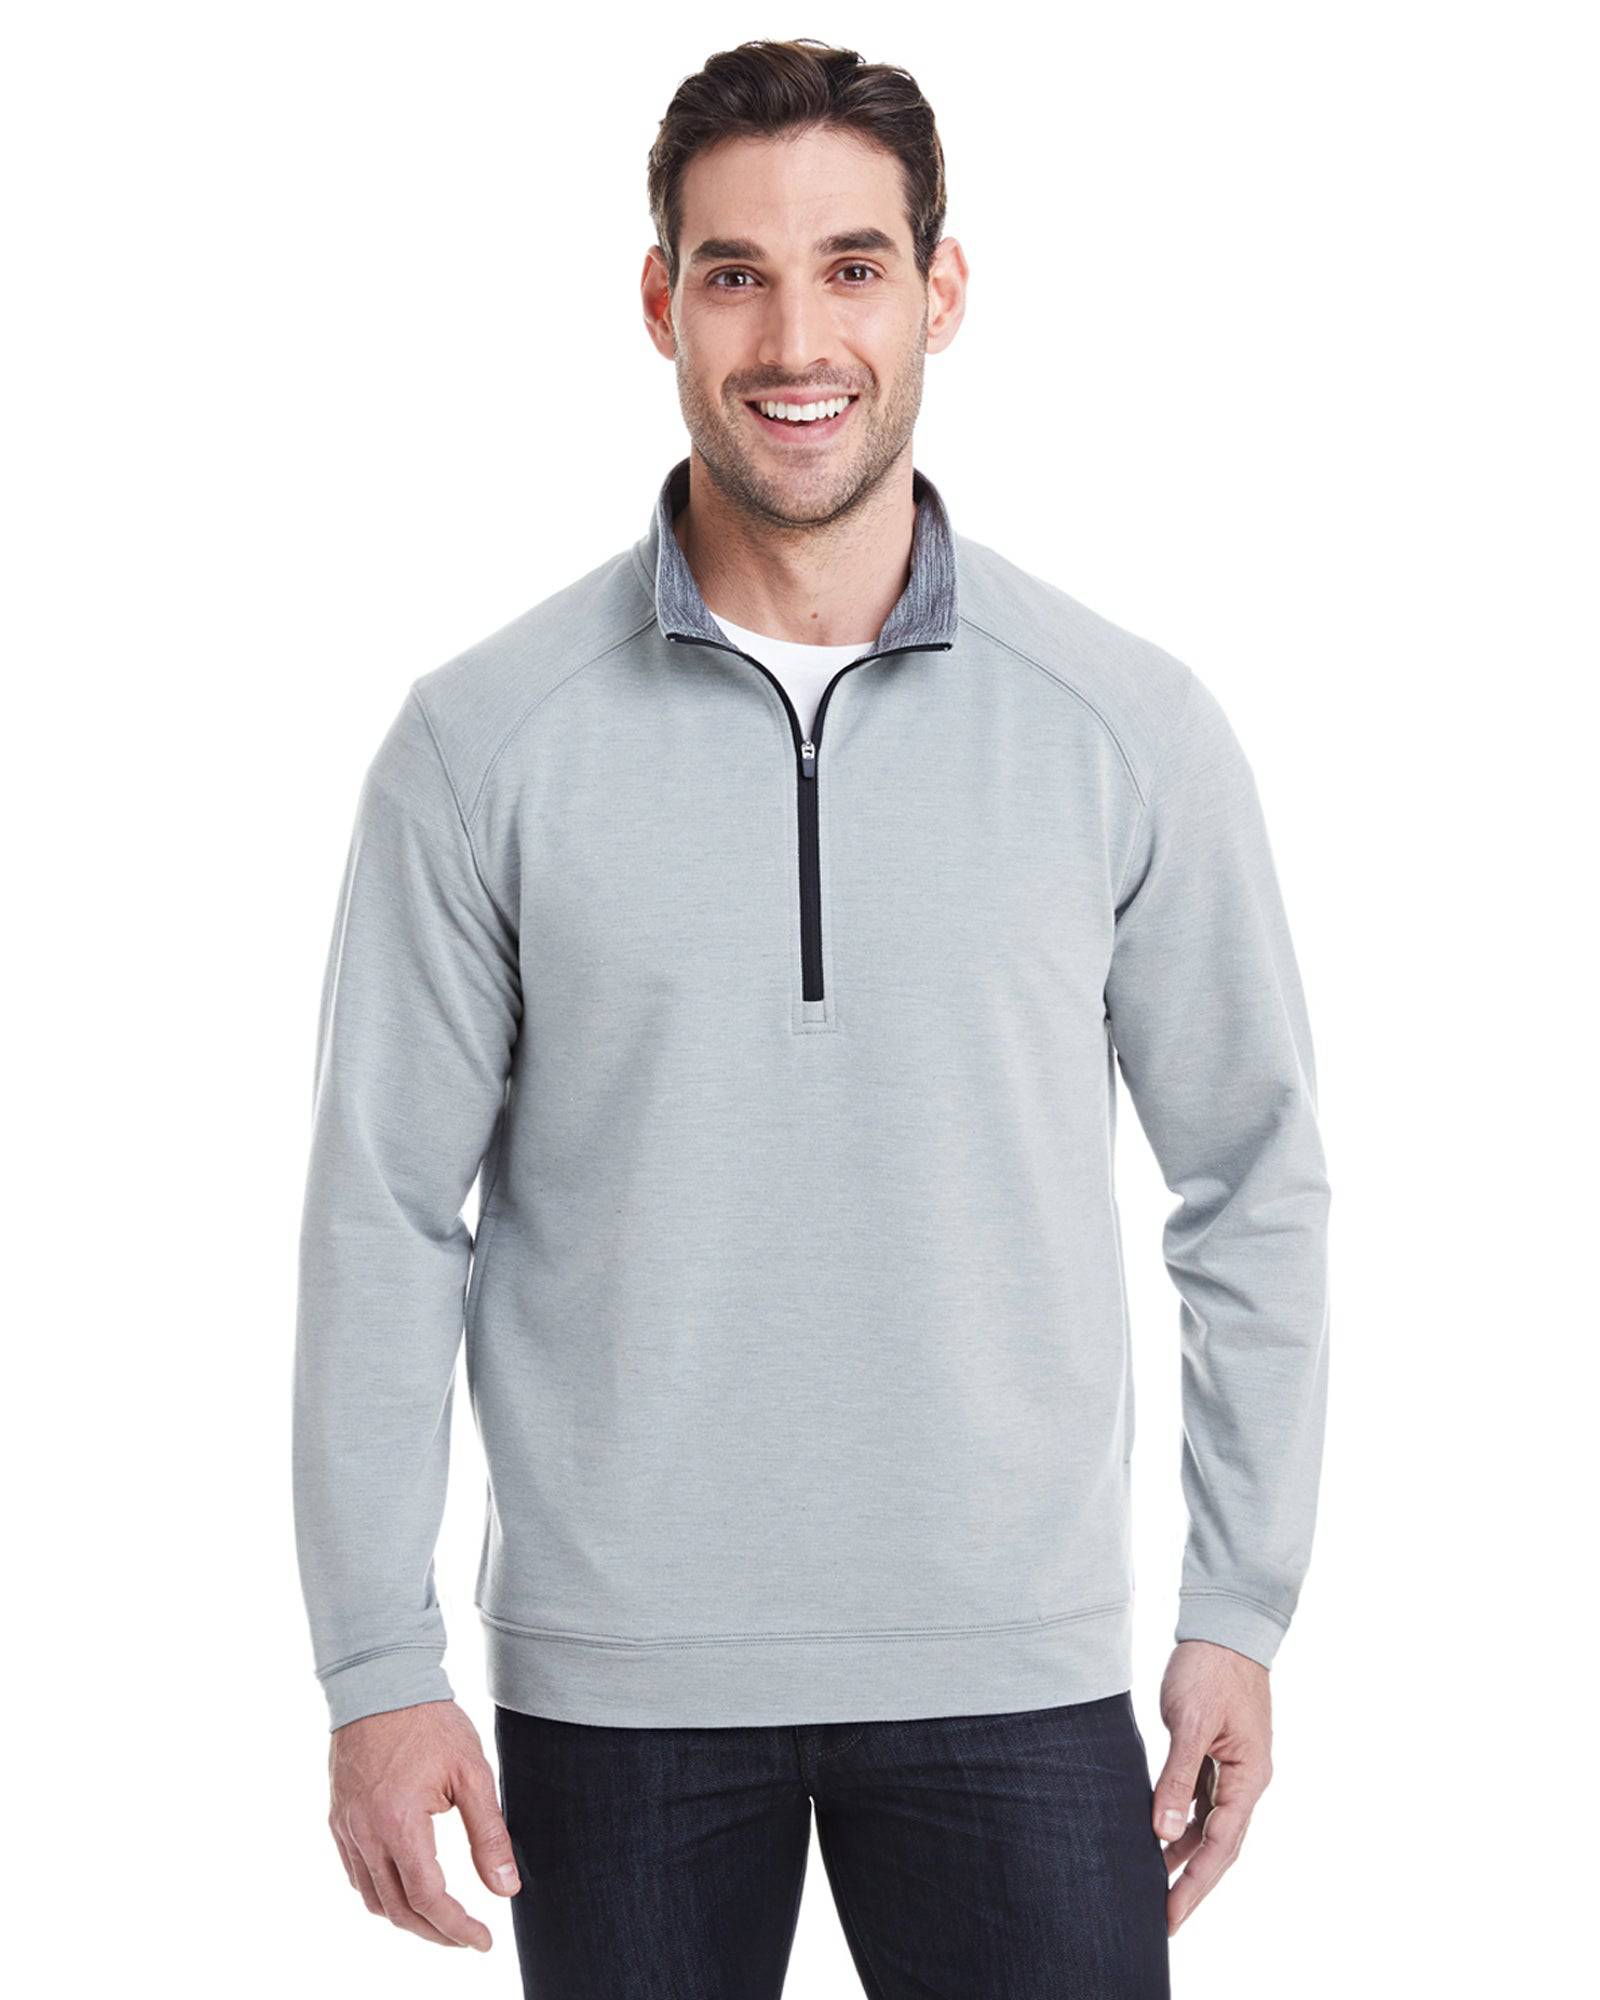 1/4 Zip Pullover in Silver Grey Tech Stretch - Rainwater's Men's Clothing and Tuxedo Rental